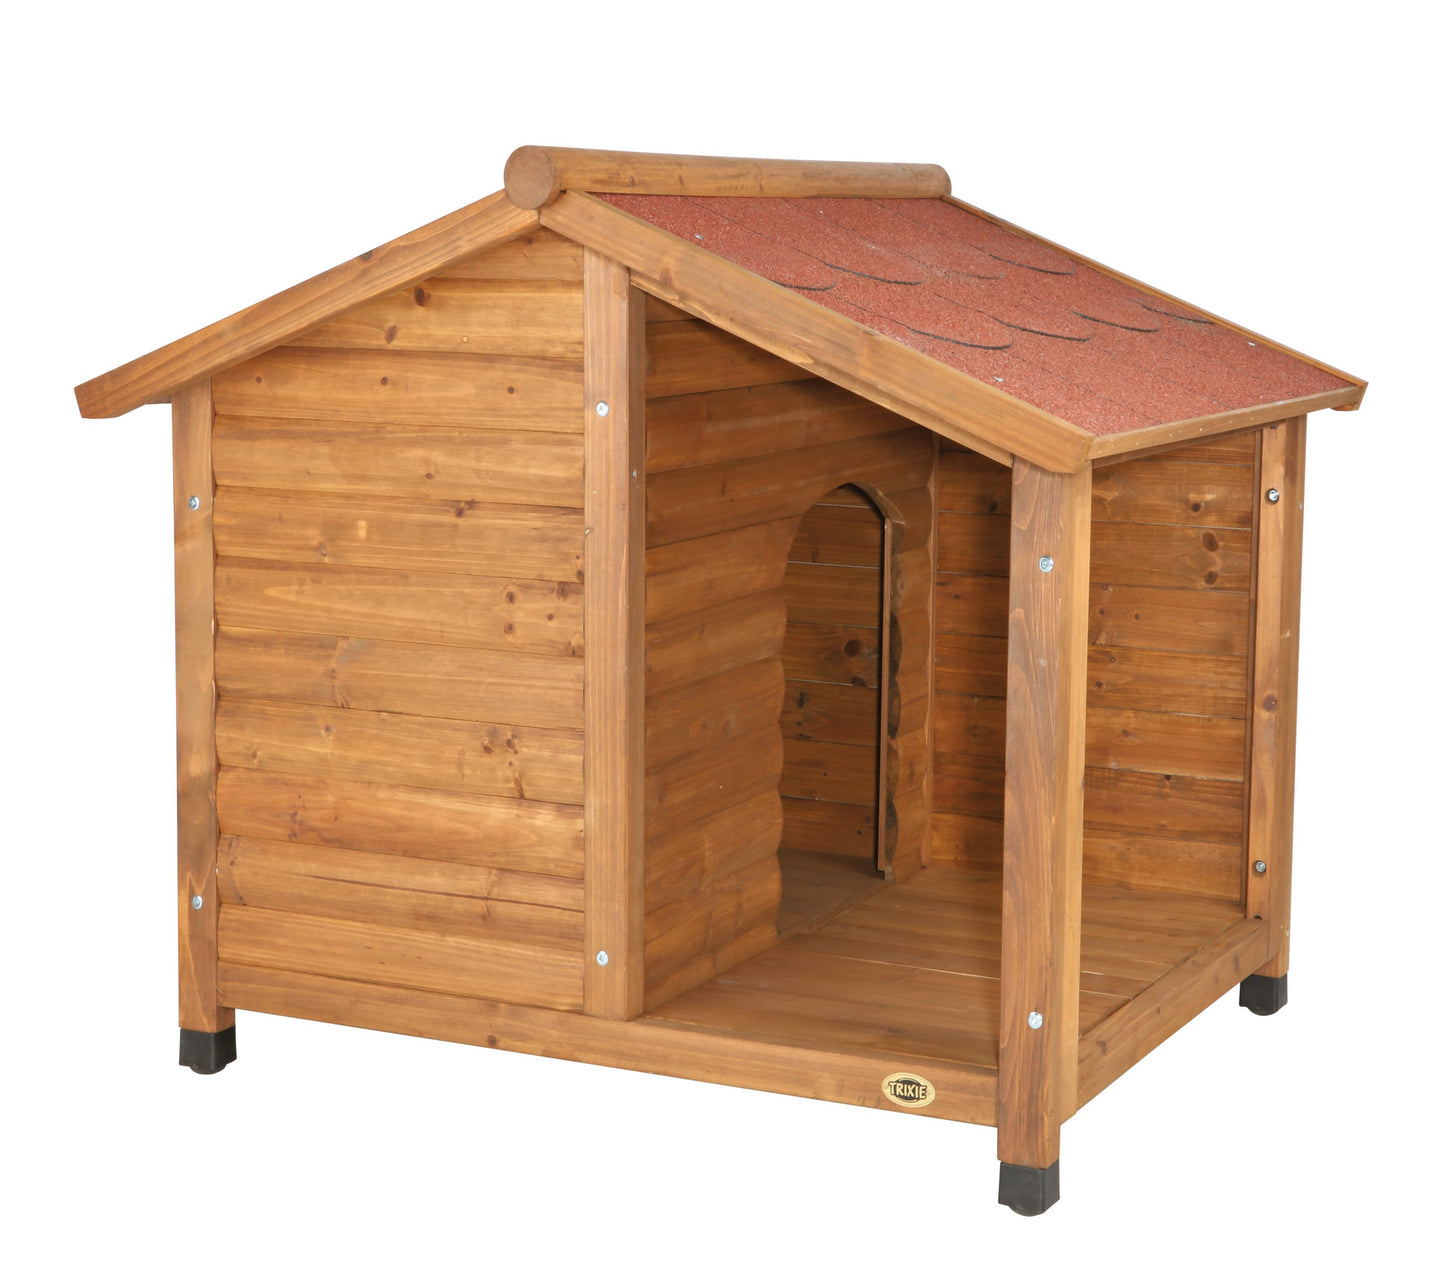 TRIXIE Natura Lodge Dog House, Covered Porch, Hinged Roof, Adjustable Legs, Brown, Small